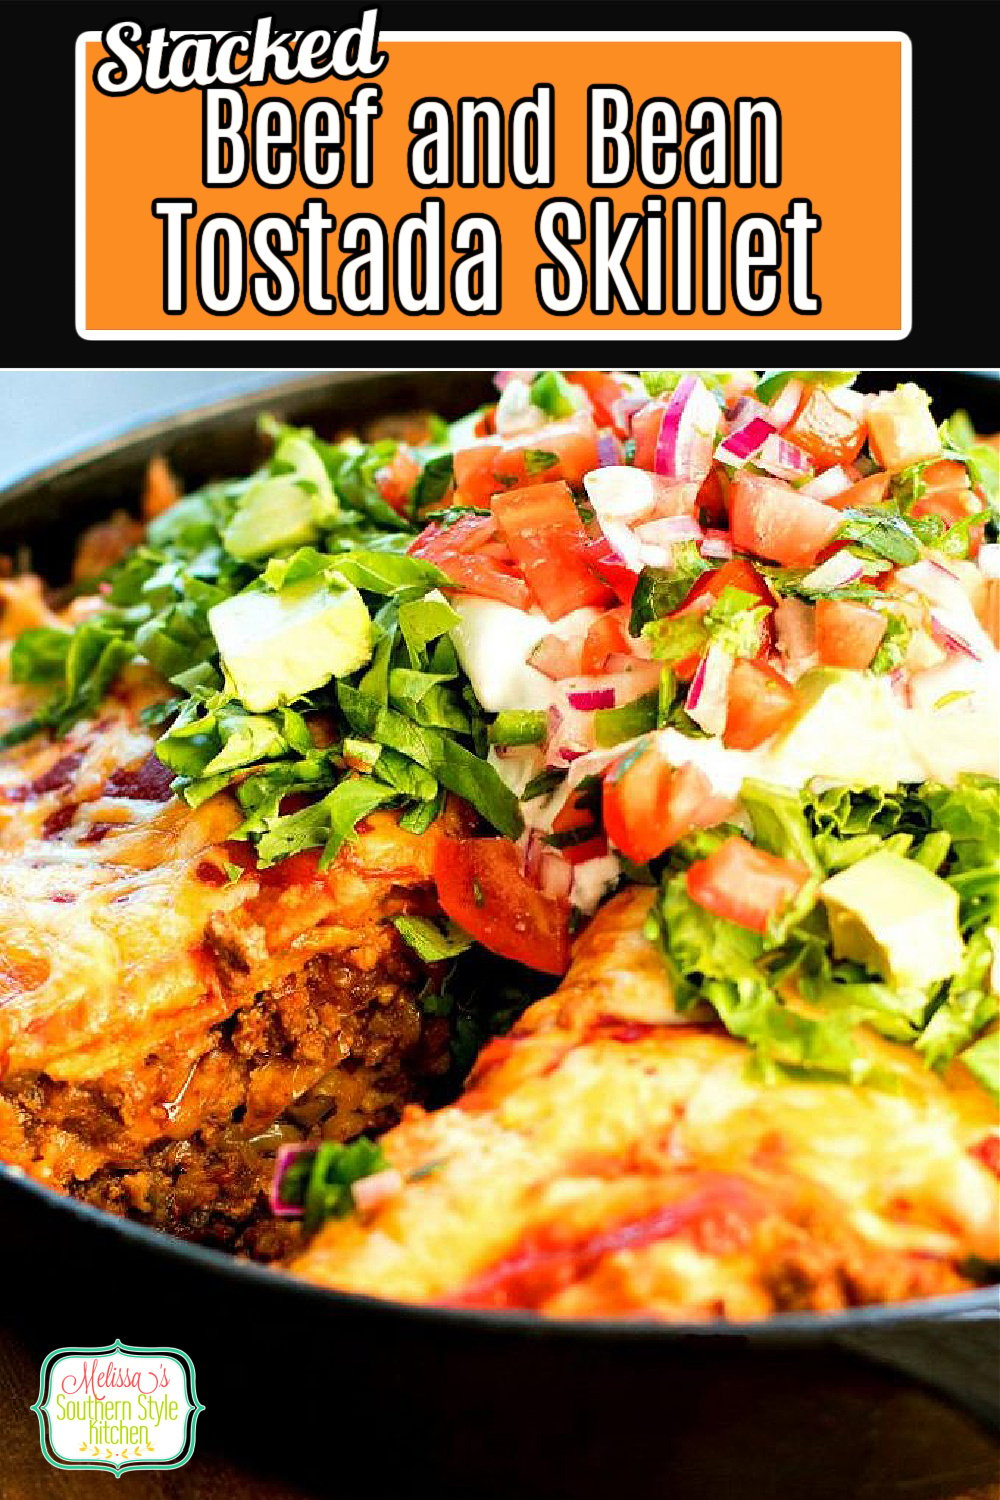 Serve this mouth watering Stacked Beef and Bean Tostada Skillet with your favorite taco toppings and create your own homestyle fiesta #tostadas #beeftostadas #mexicanfood #beef #easygroundbeefrecipes #beefandbeantostadas #partyfood #skilletmeals via @melissasssk